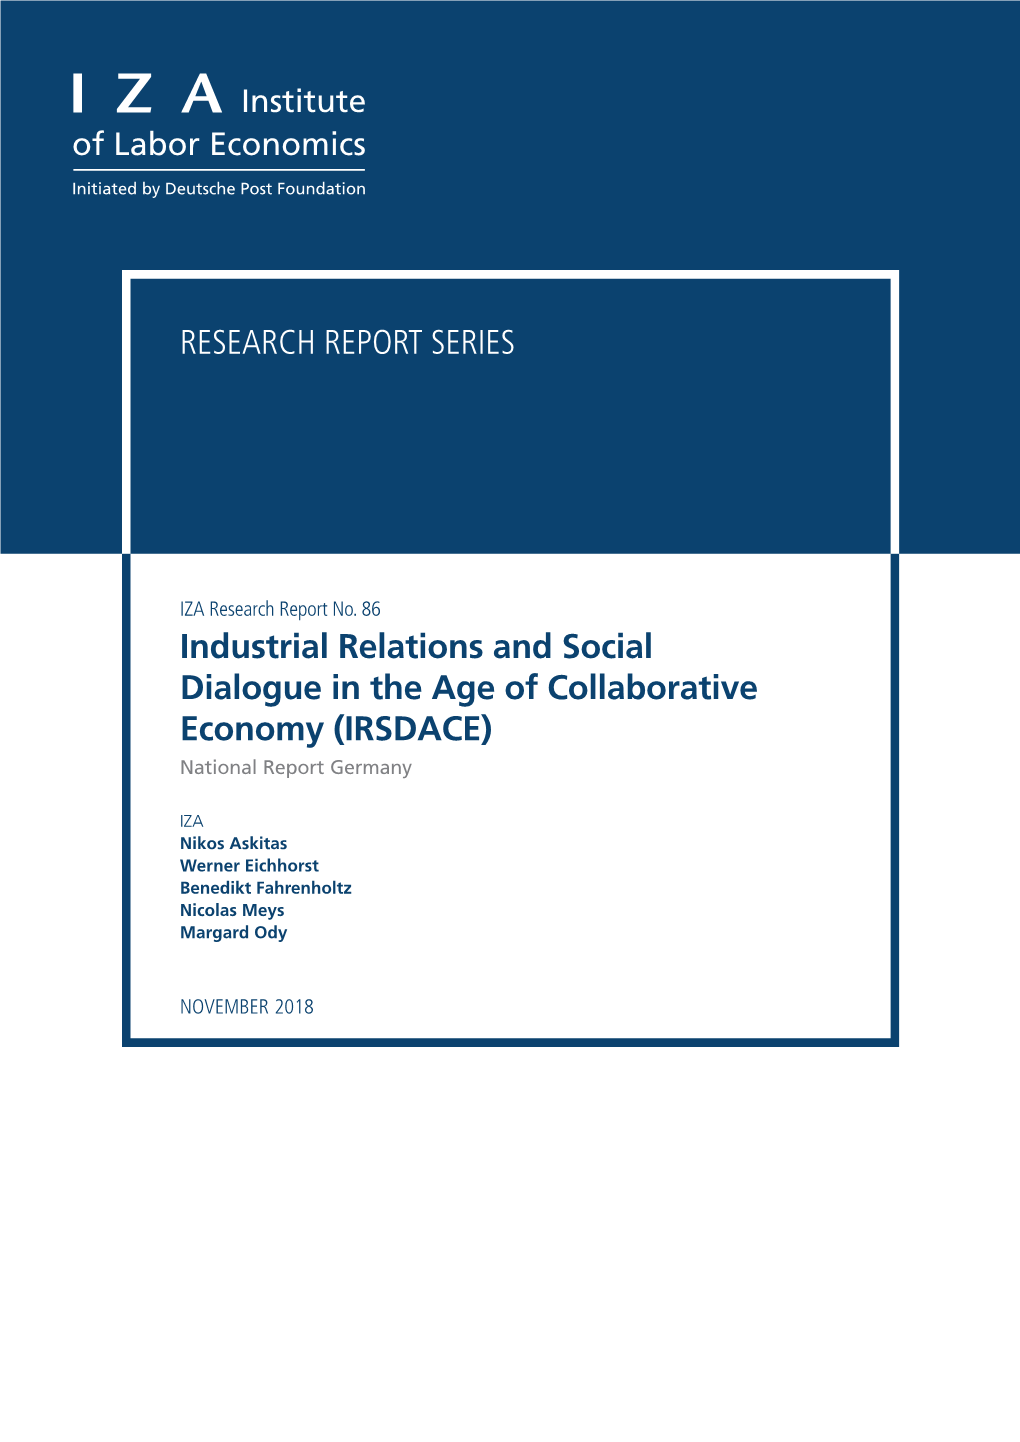 Industrial Relations and Social Dialogue in the Age of Collaborative Economy (IRSDACE) National Report Germany